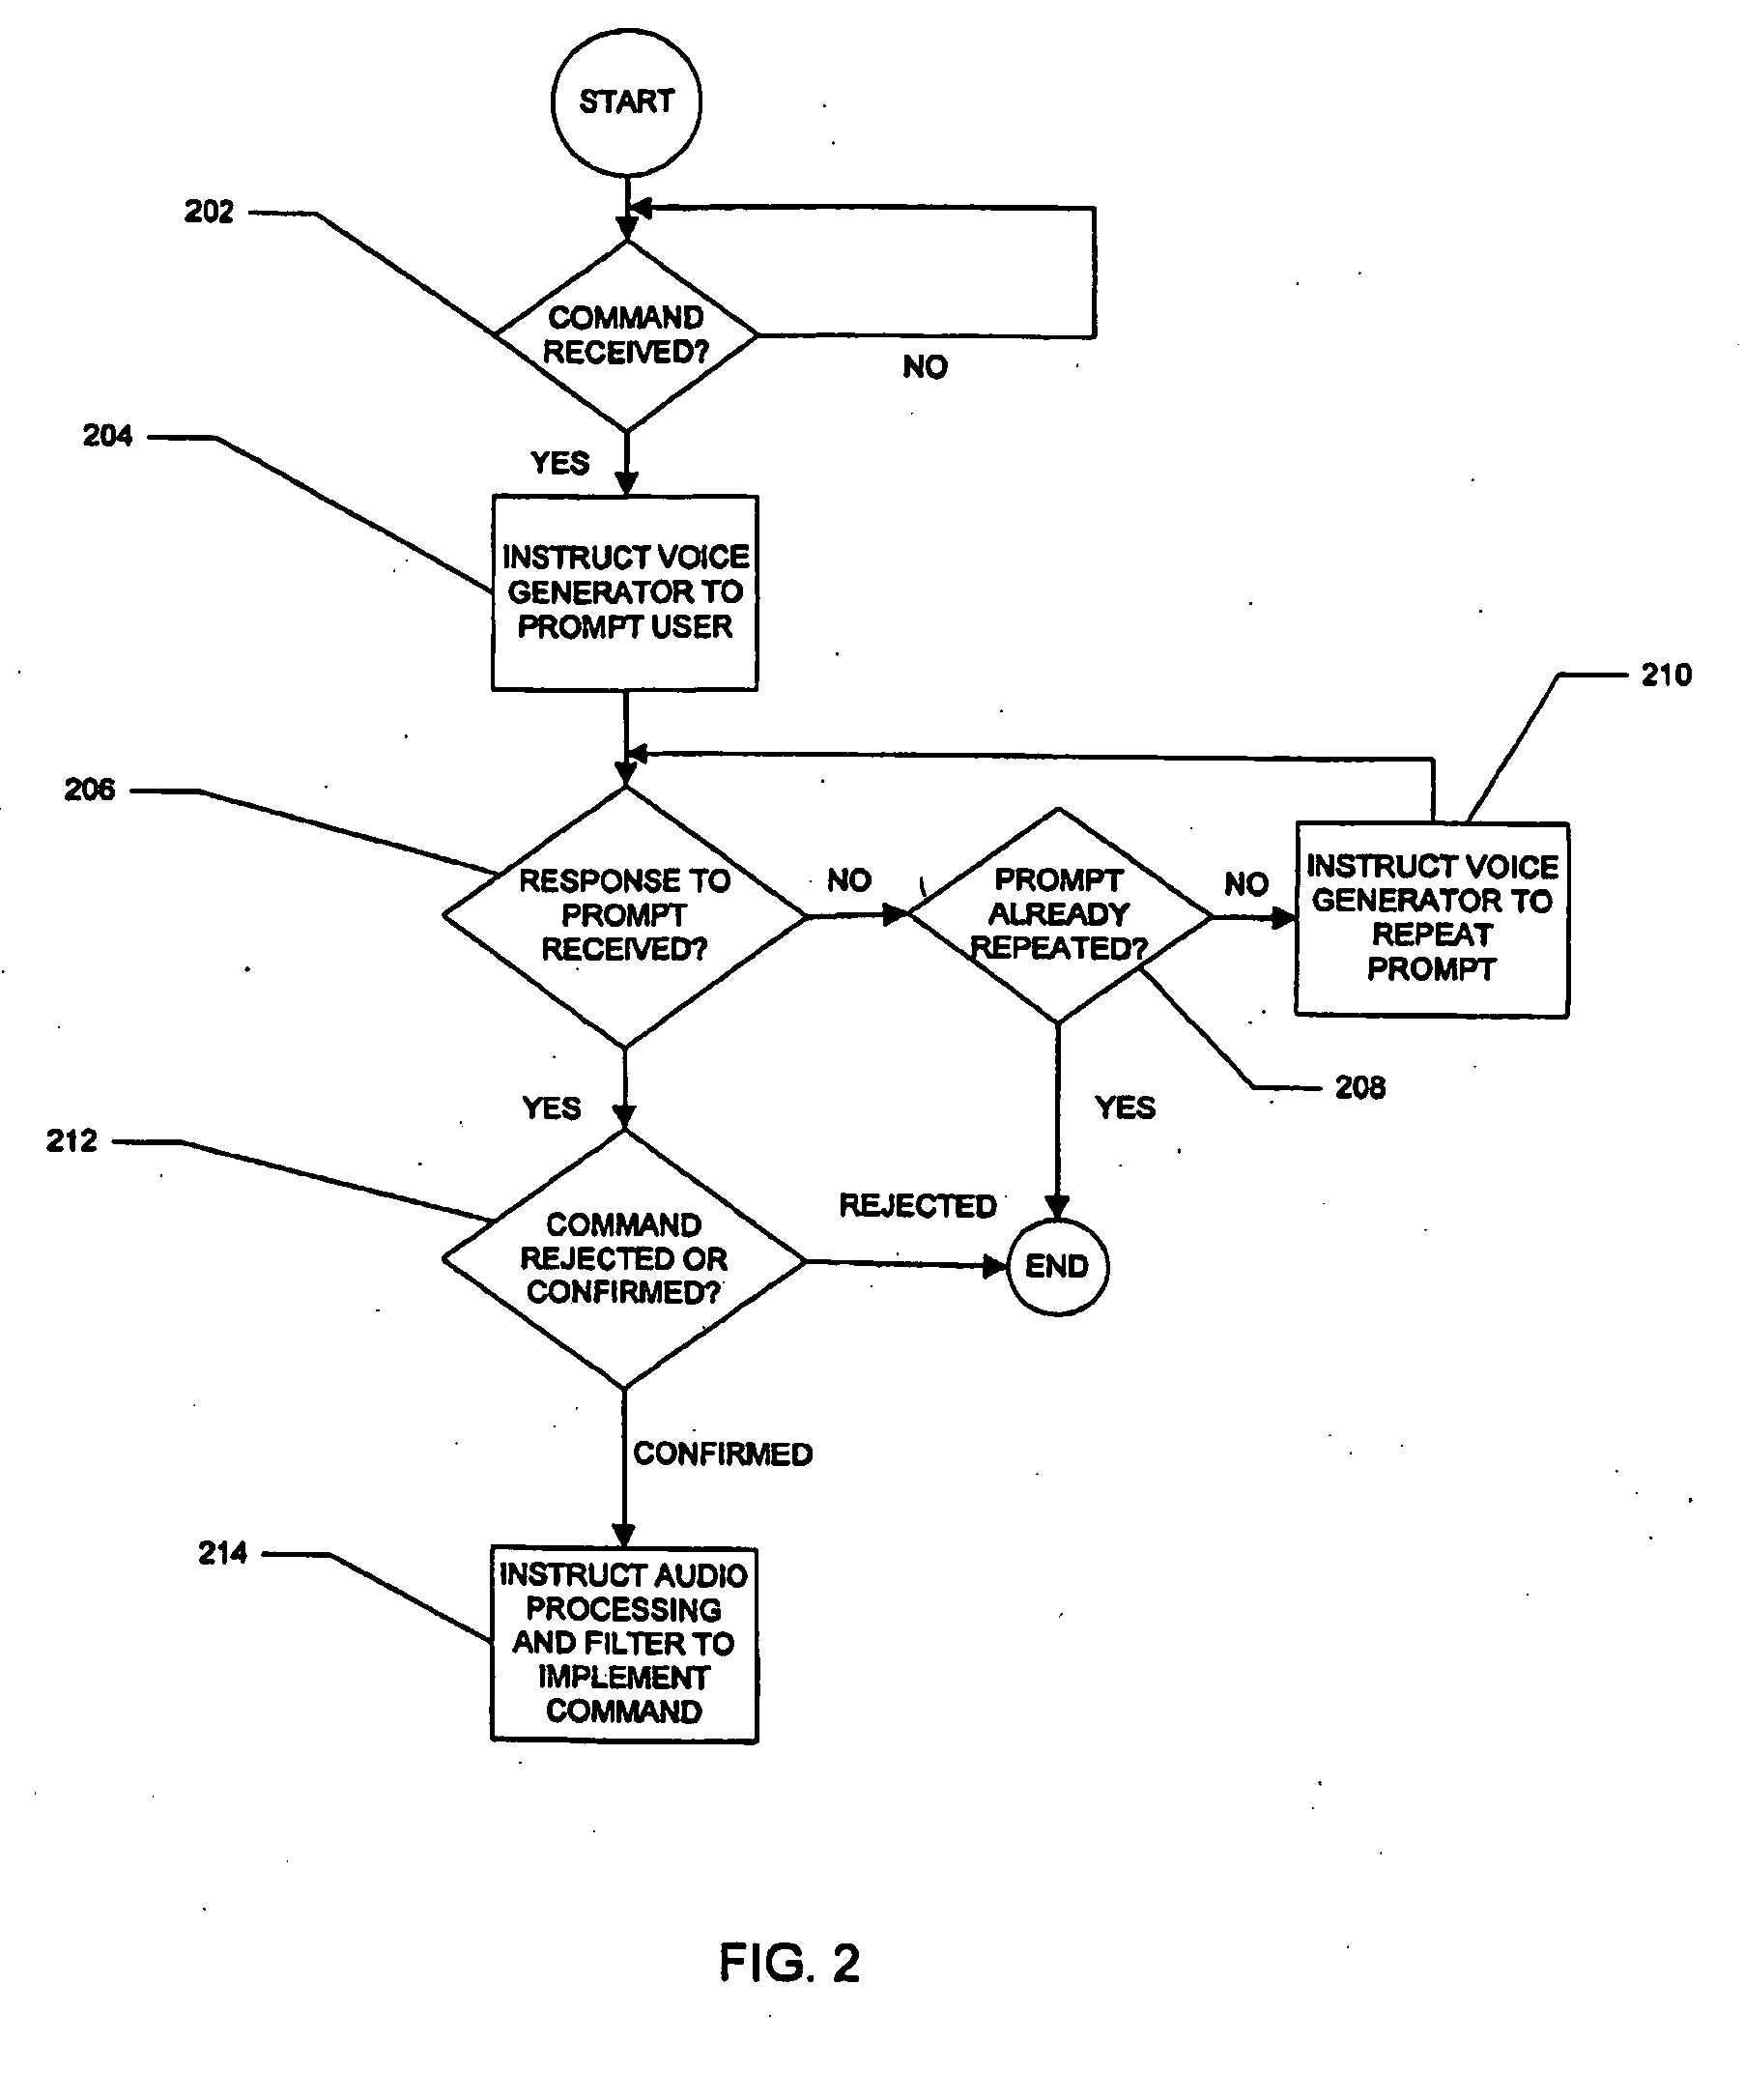 Method and apparatus for controlling a headphone